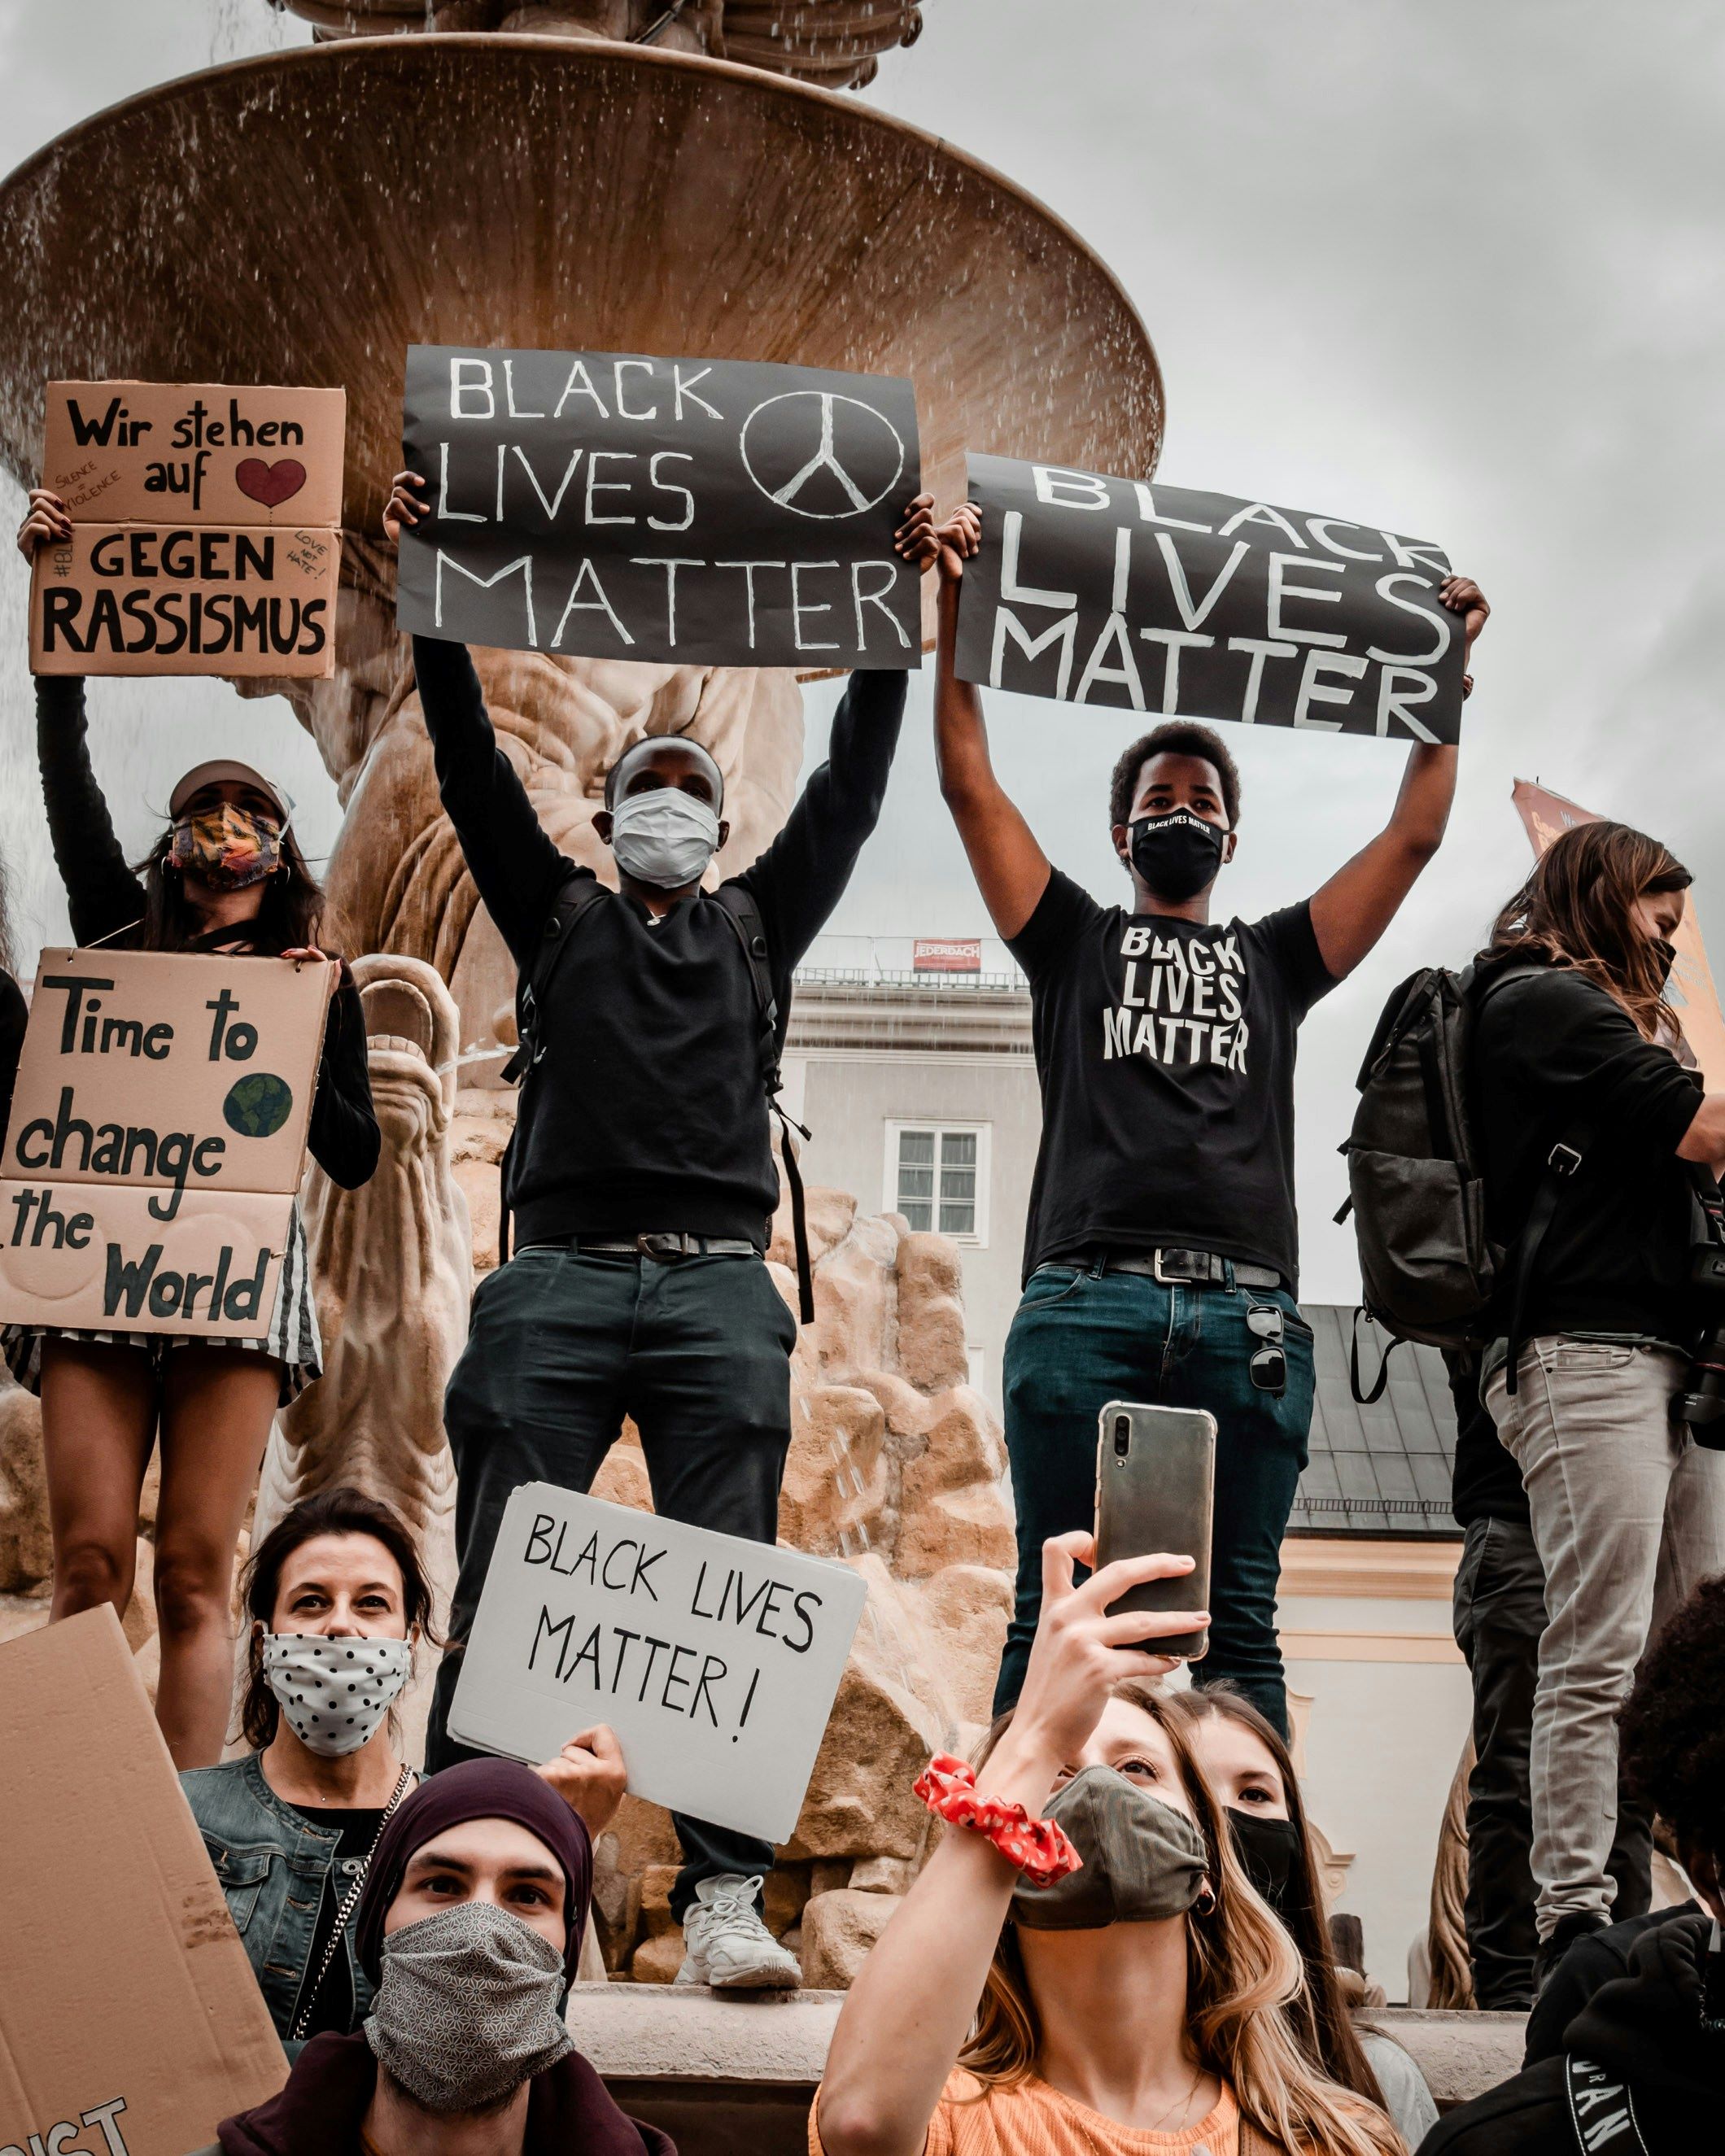 An image of a Black Lives Matter protest taking place by a fountain. People are holding signs reading 'Black Lives Matter!', 'Time to Change the World' and 'Wir stehen auf geggen rassismus'.